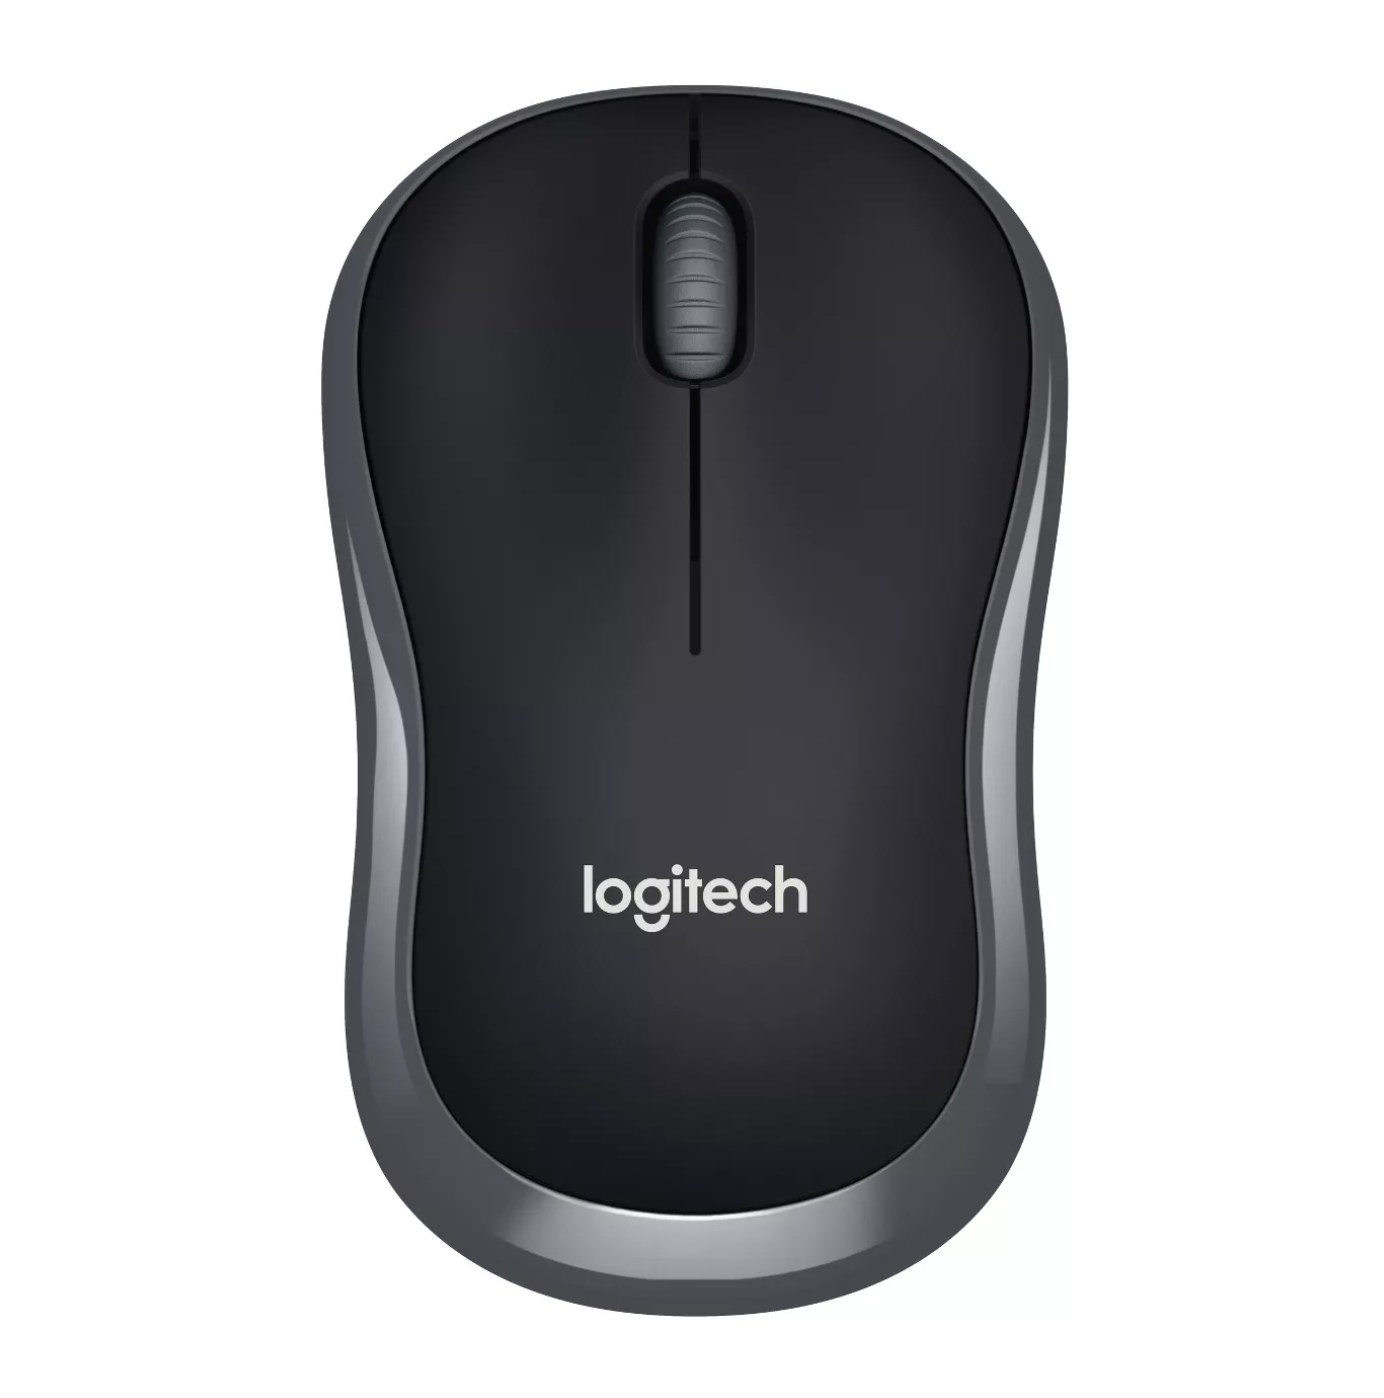 the black wireless mouse